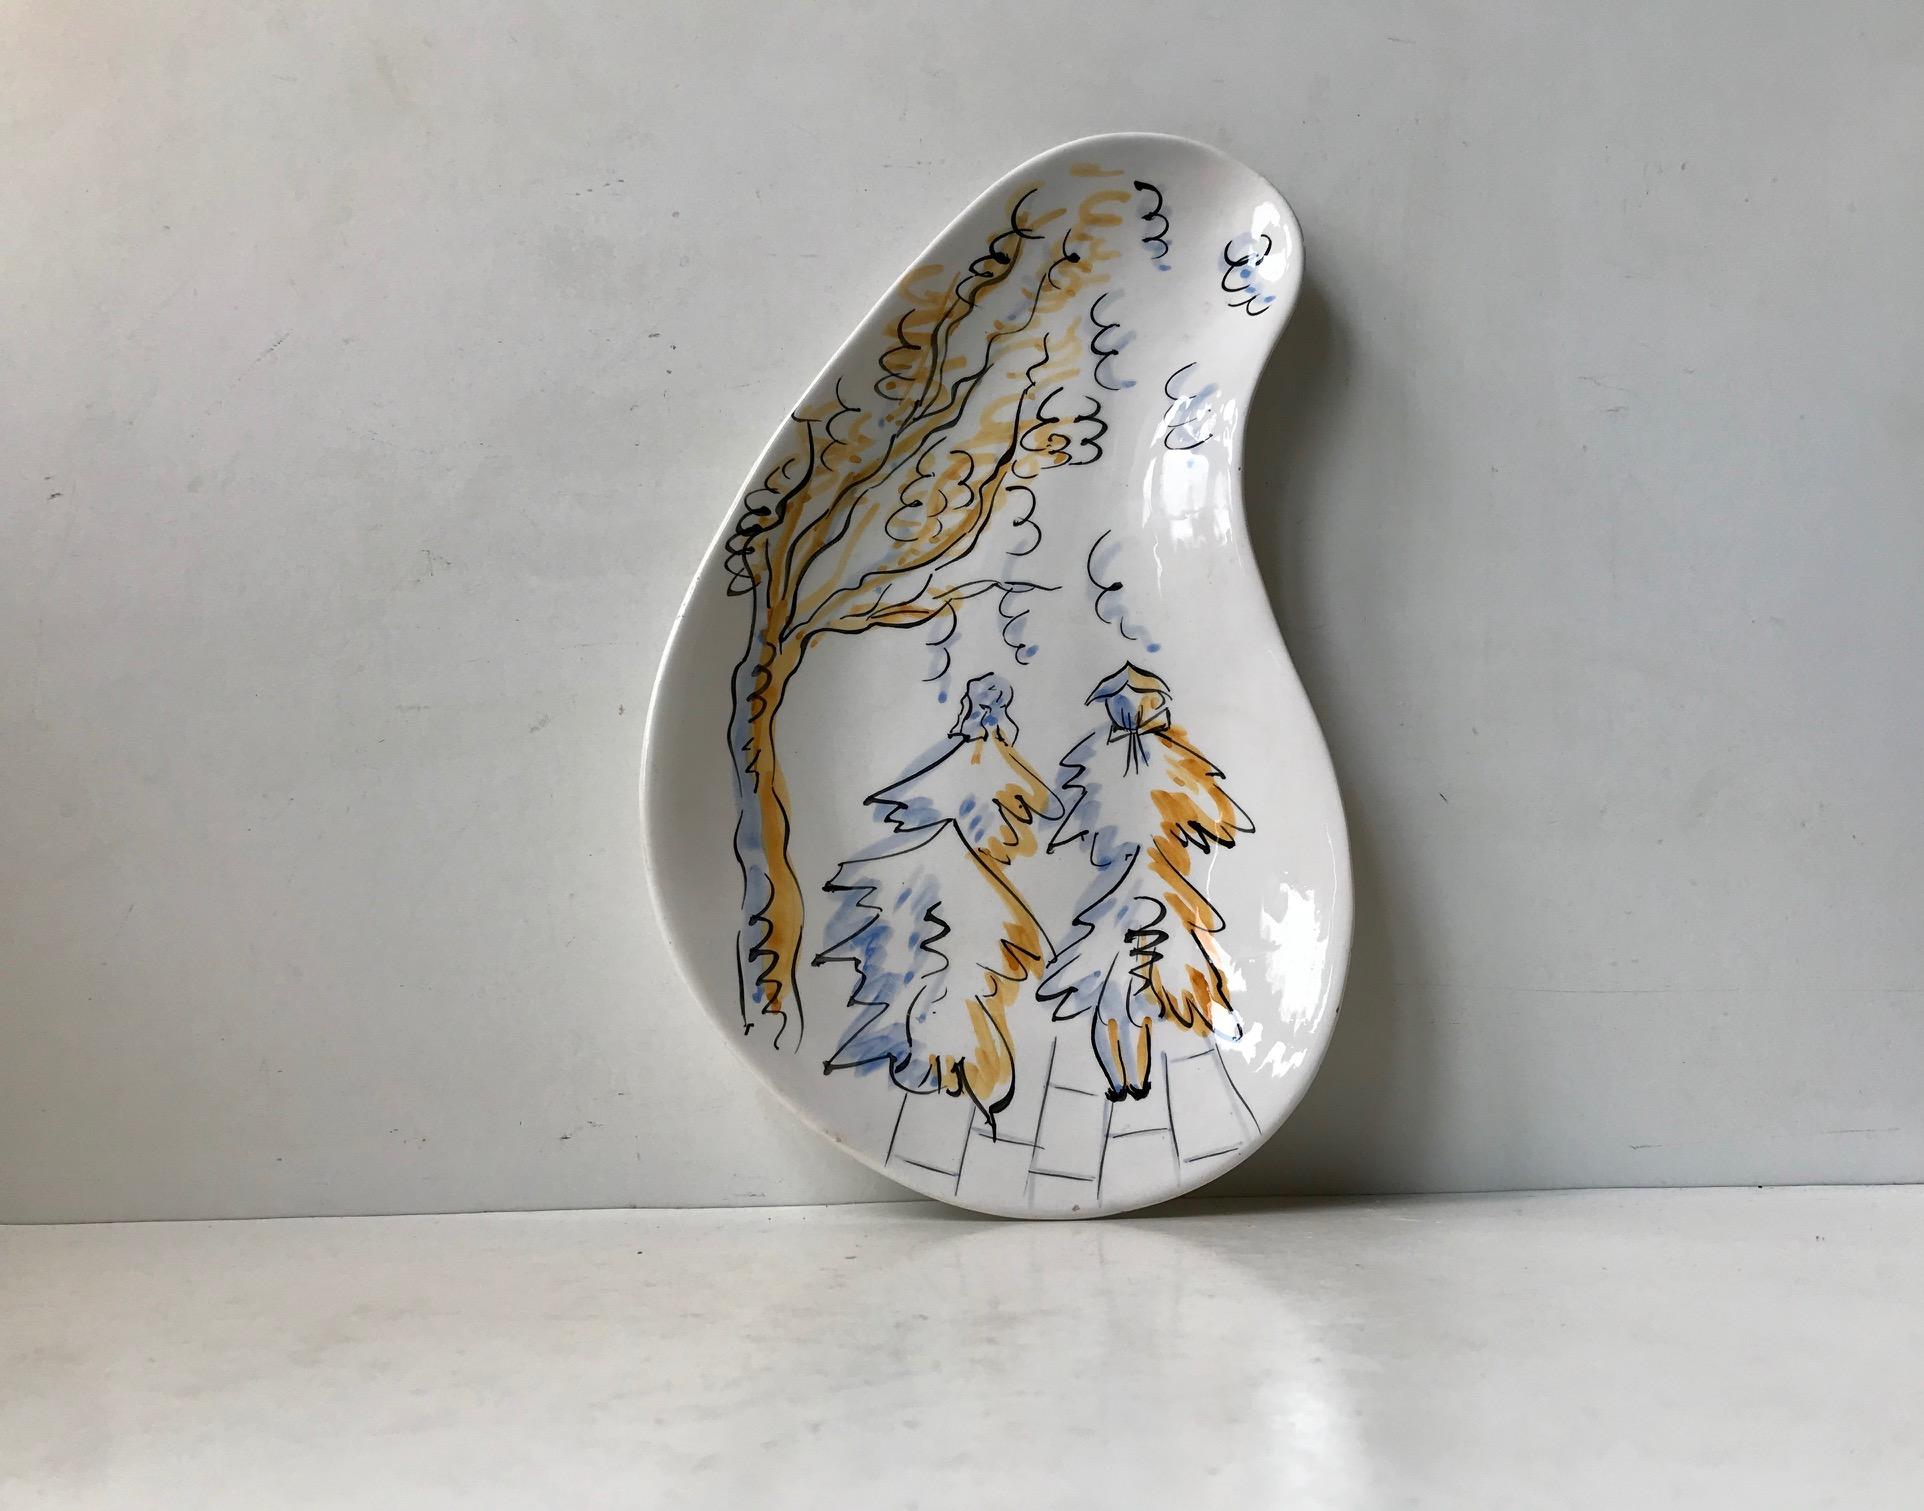 Kidney shaped ceramic art dish with a scenic motif of two persons. Style abstract expressionism. Designed and manufactured anonymously in Italy during the 1950s. It is numbered 236 and marked Made in Italy.